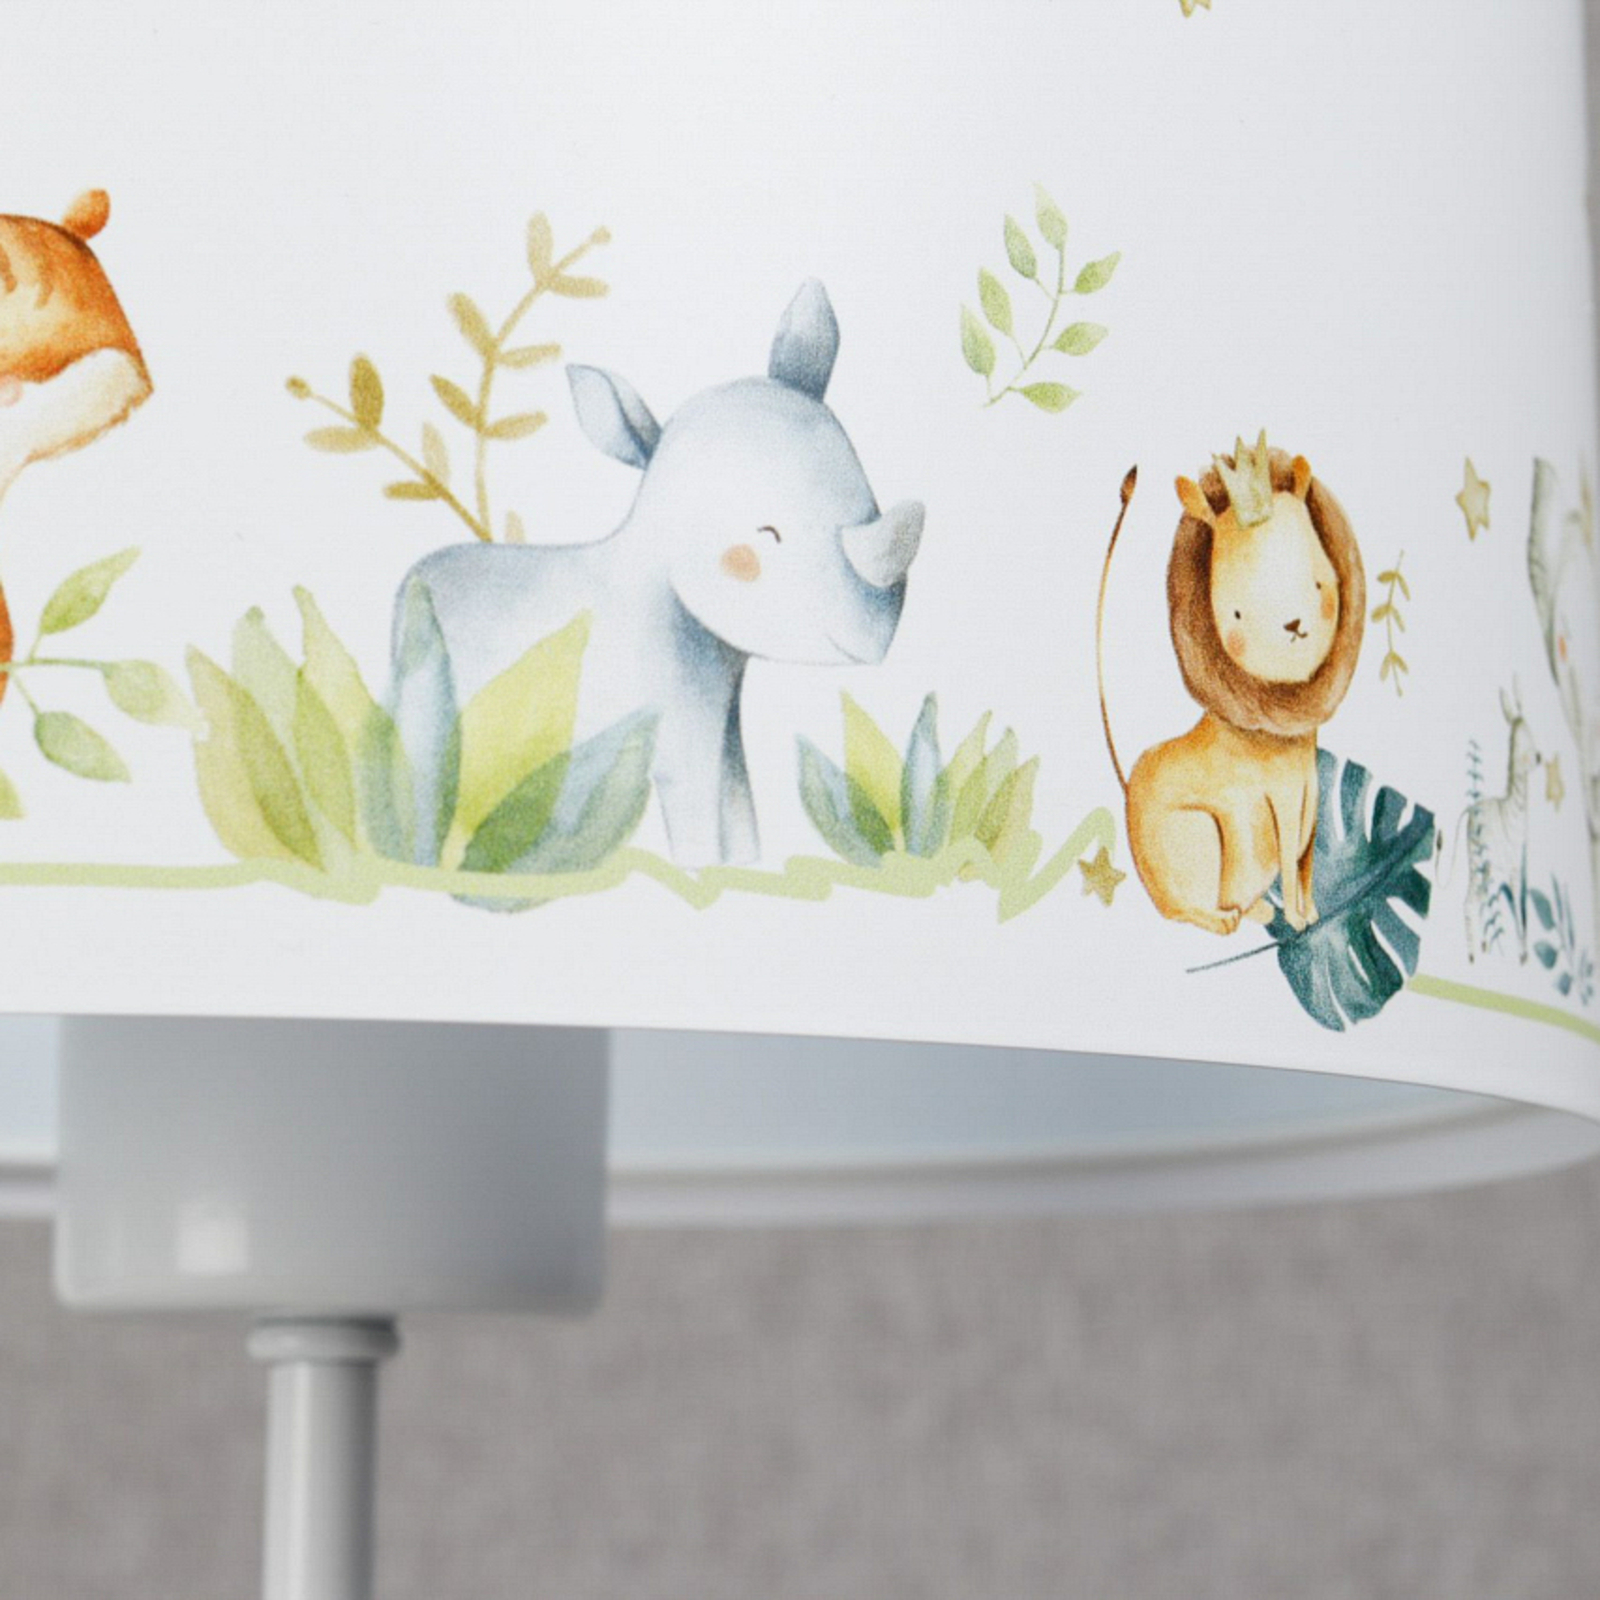 Max children's bedside table lamp